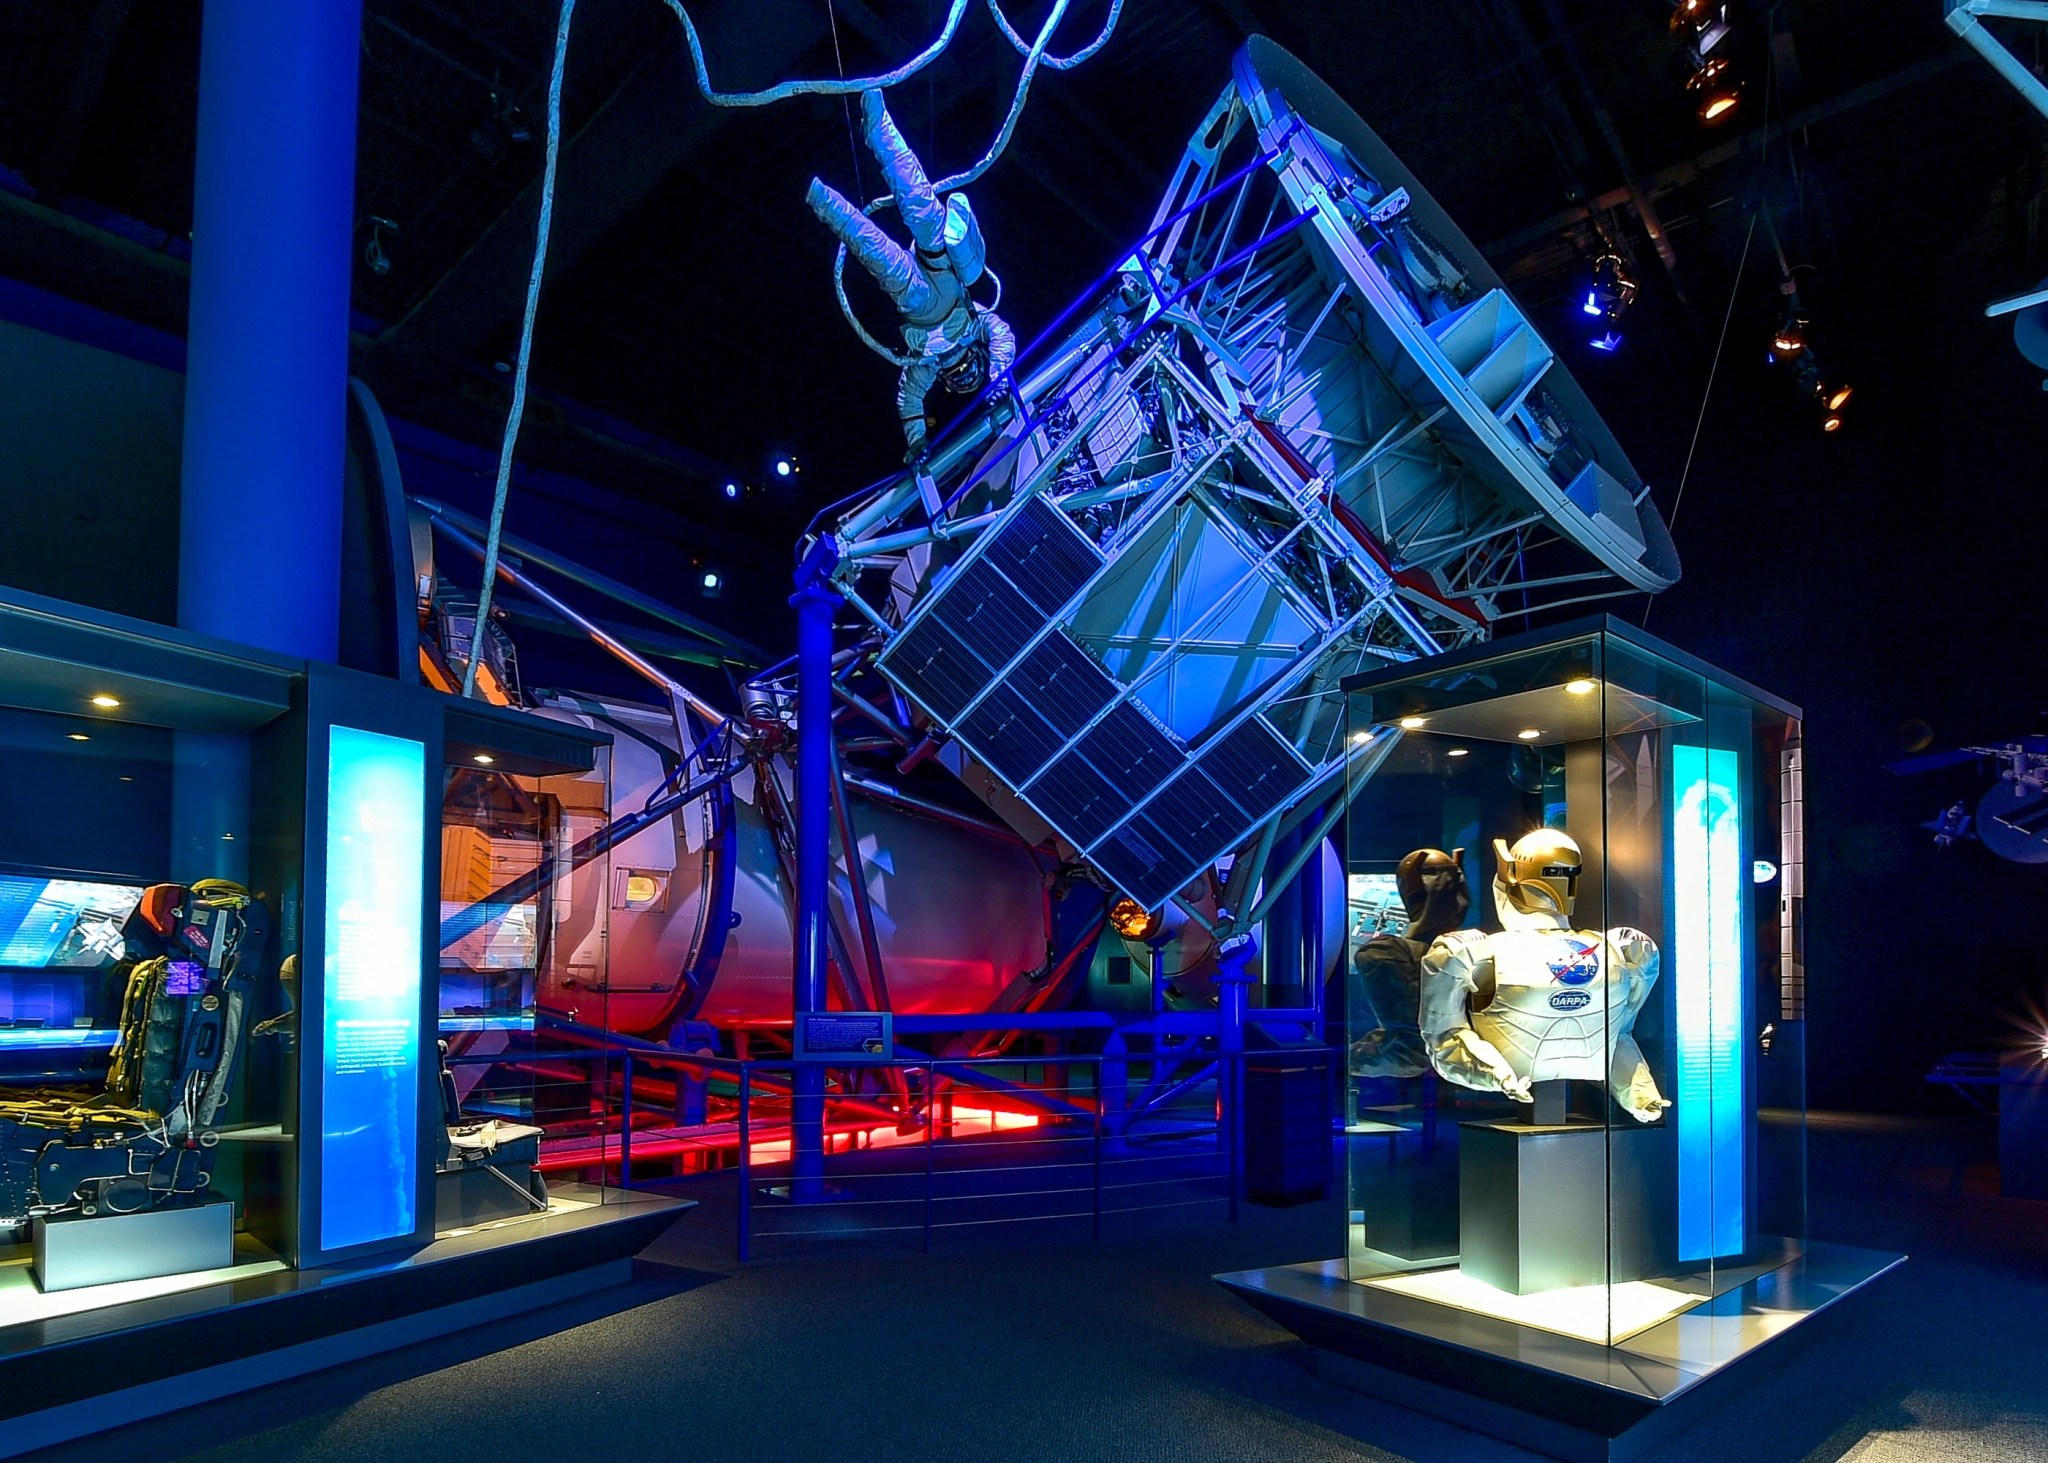 Interior of a museum showing cool NASA artifacts